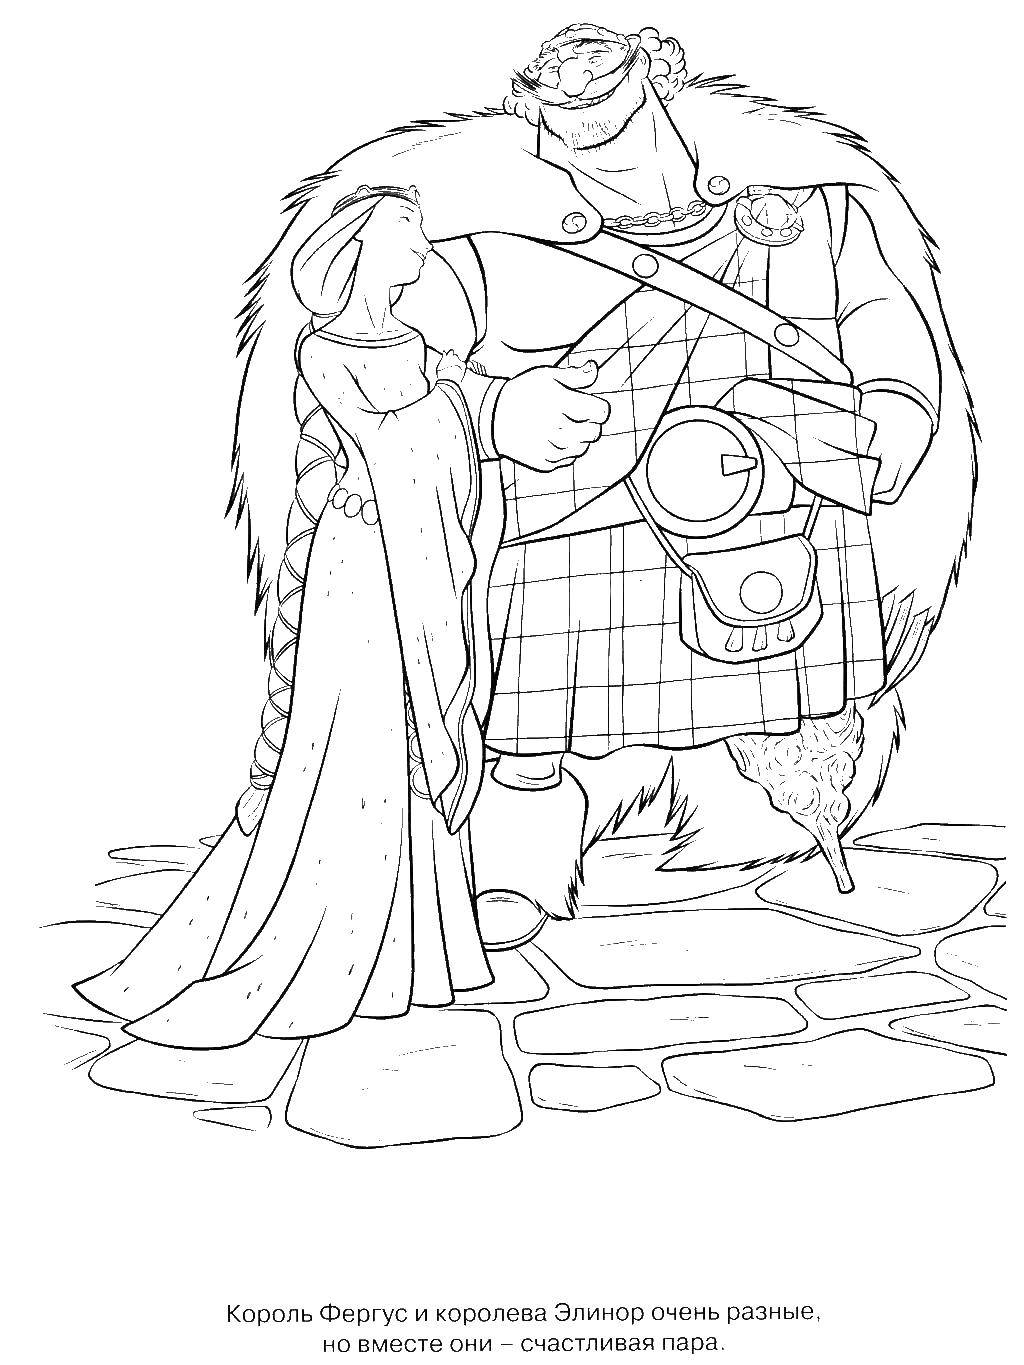 Coloring King Fergus and Queen Elinor. Category brave heart. Tags:  brave, Merida, Fergus.